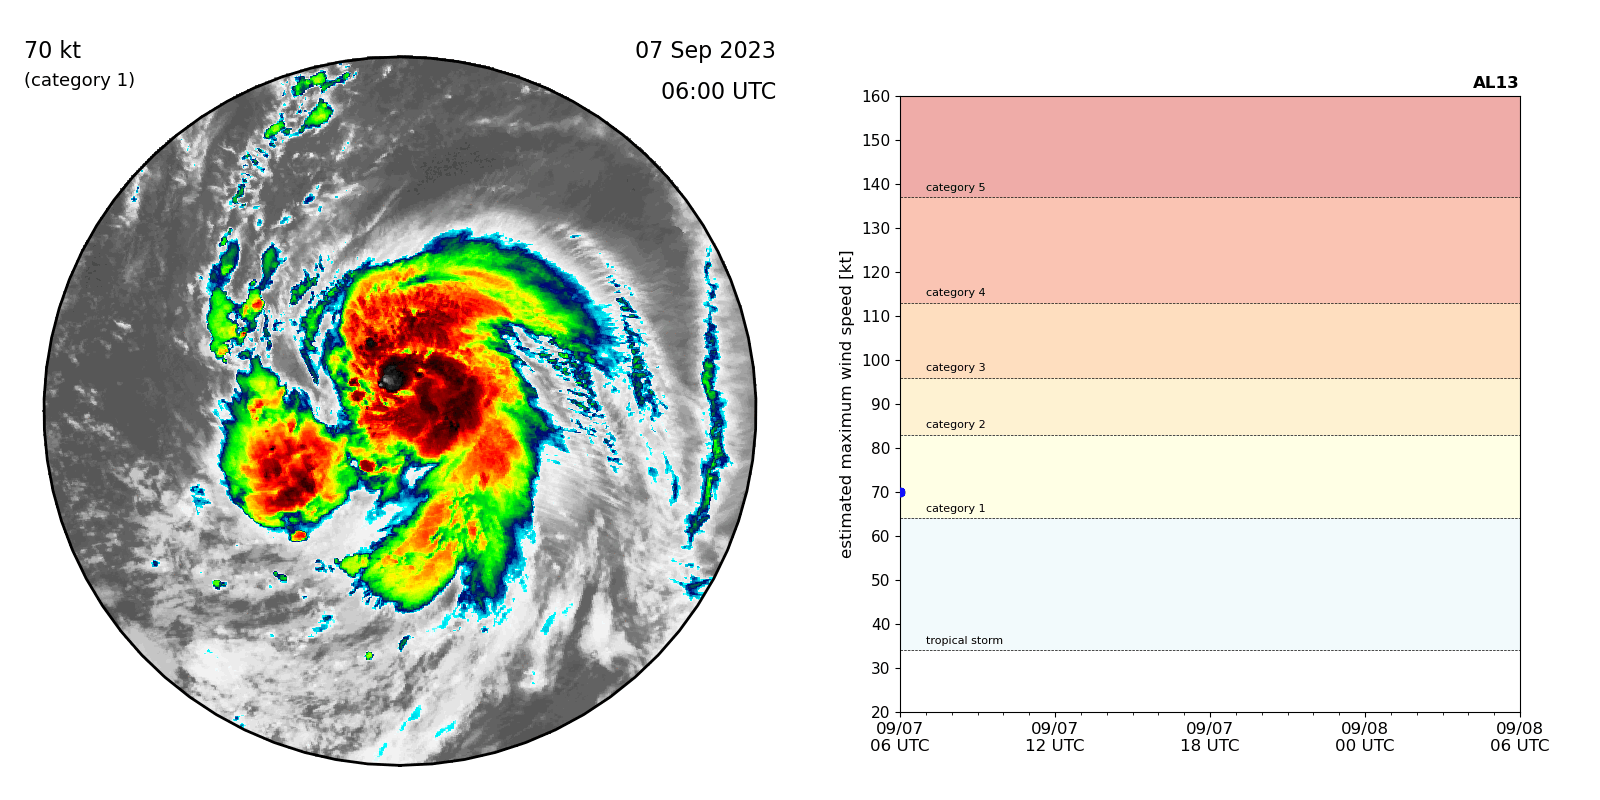 Hurricane Lee (left) experienced rapid intensification, intensifying from a Category 1 storm (in yellow in the chart on the right) to a Category 5 storm (in red).